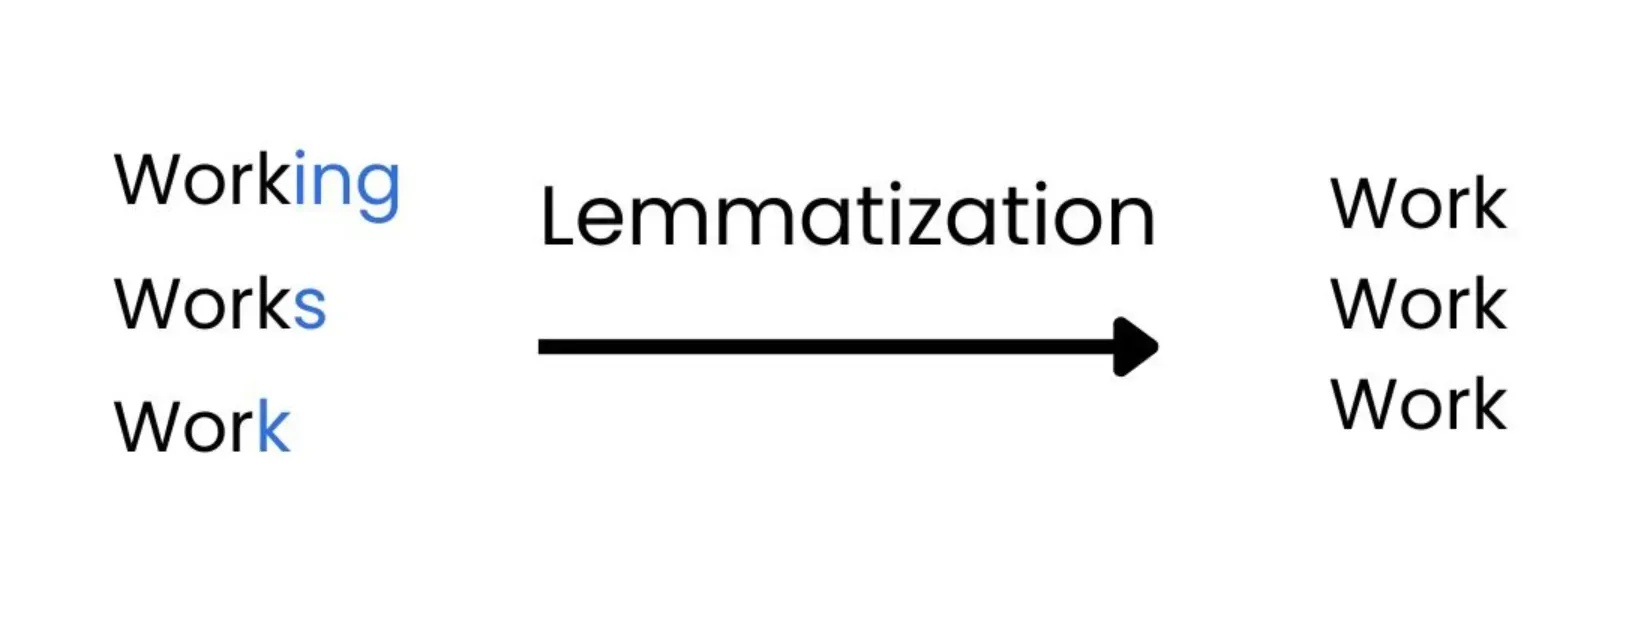 Benefits and Challenges of Lemmatization